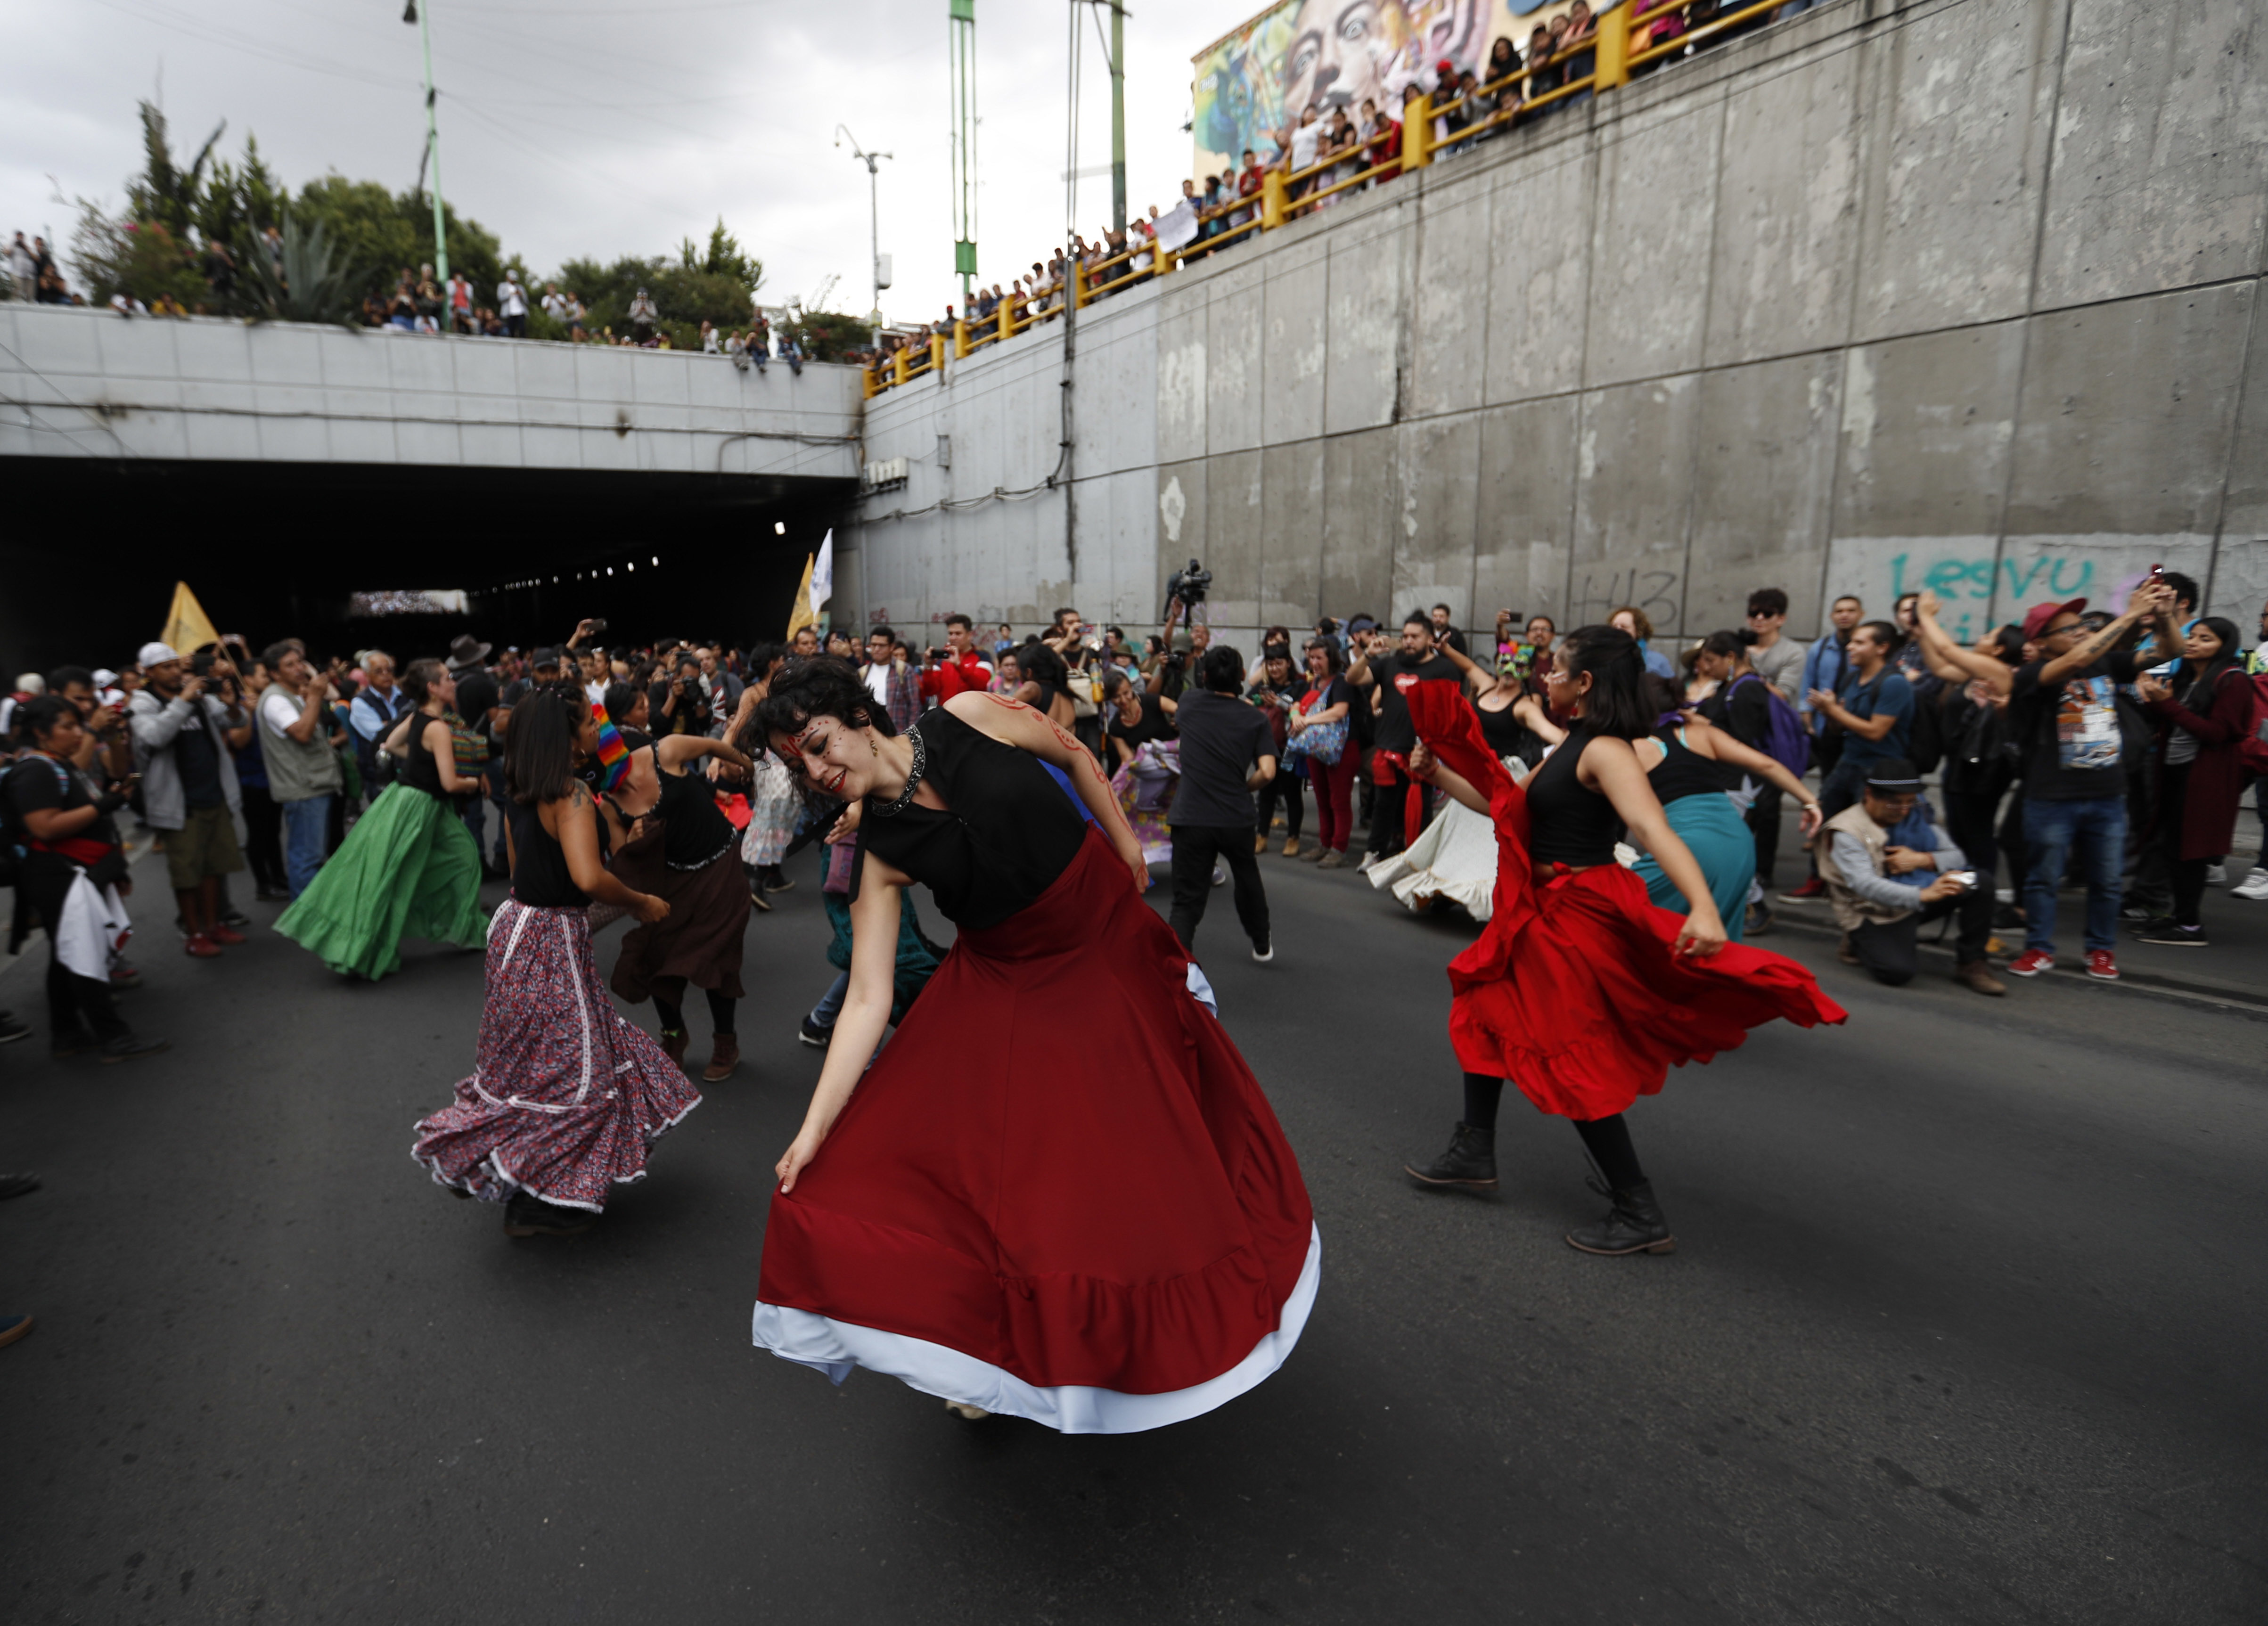 Demonstrators  dance during a march in remembrance of the 1968 Tlatelolco student massacre in Mexico City, Tuesday, Oct. 2, 2018. Mexico is marking the massacre of student protesters by army troops 50 years ago. The mural behind reads in Spanish: 